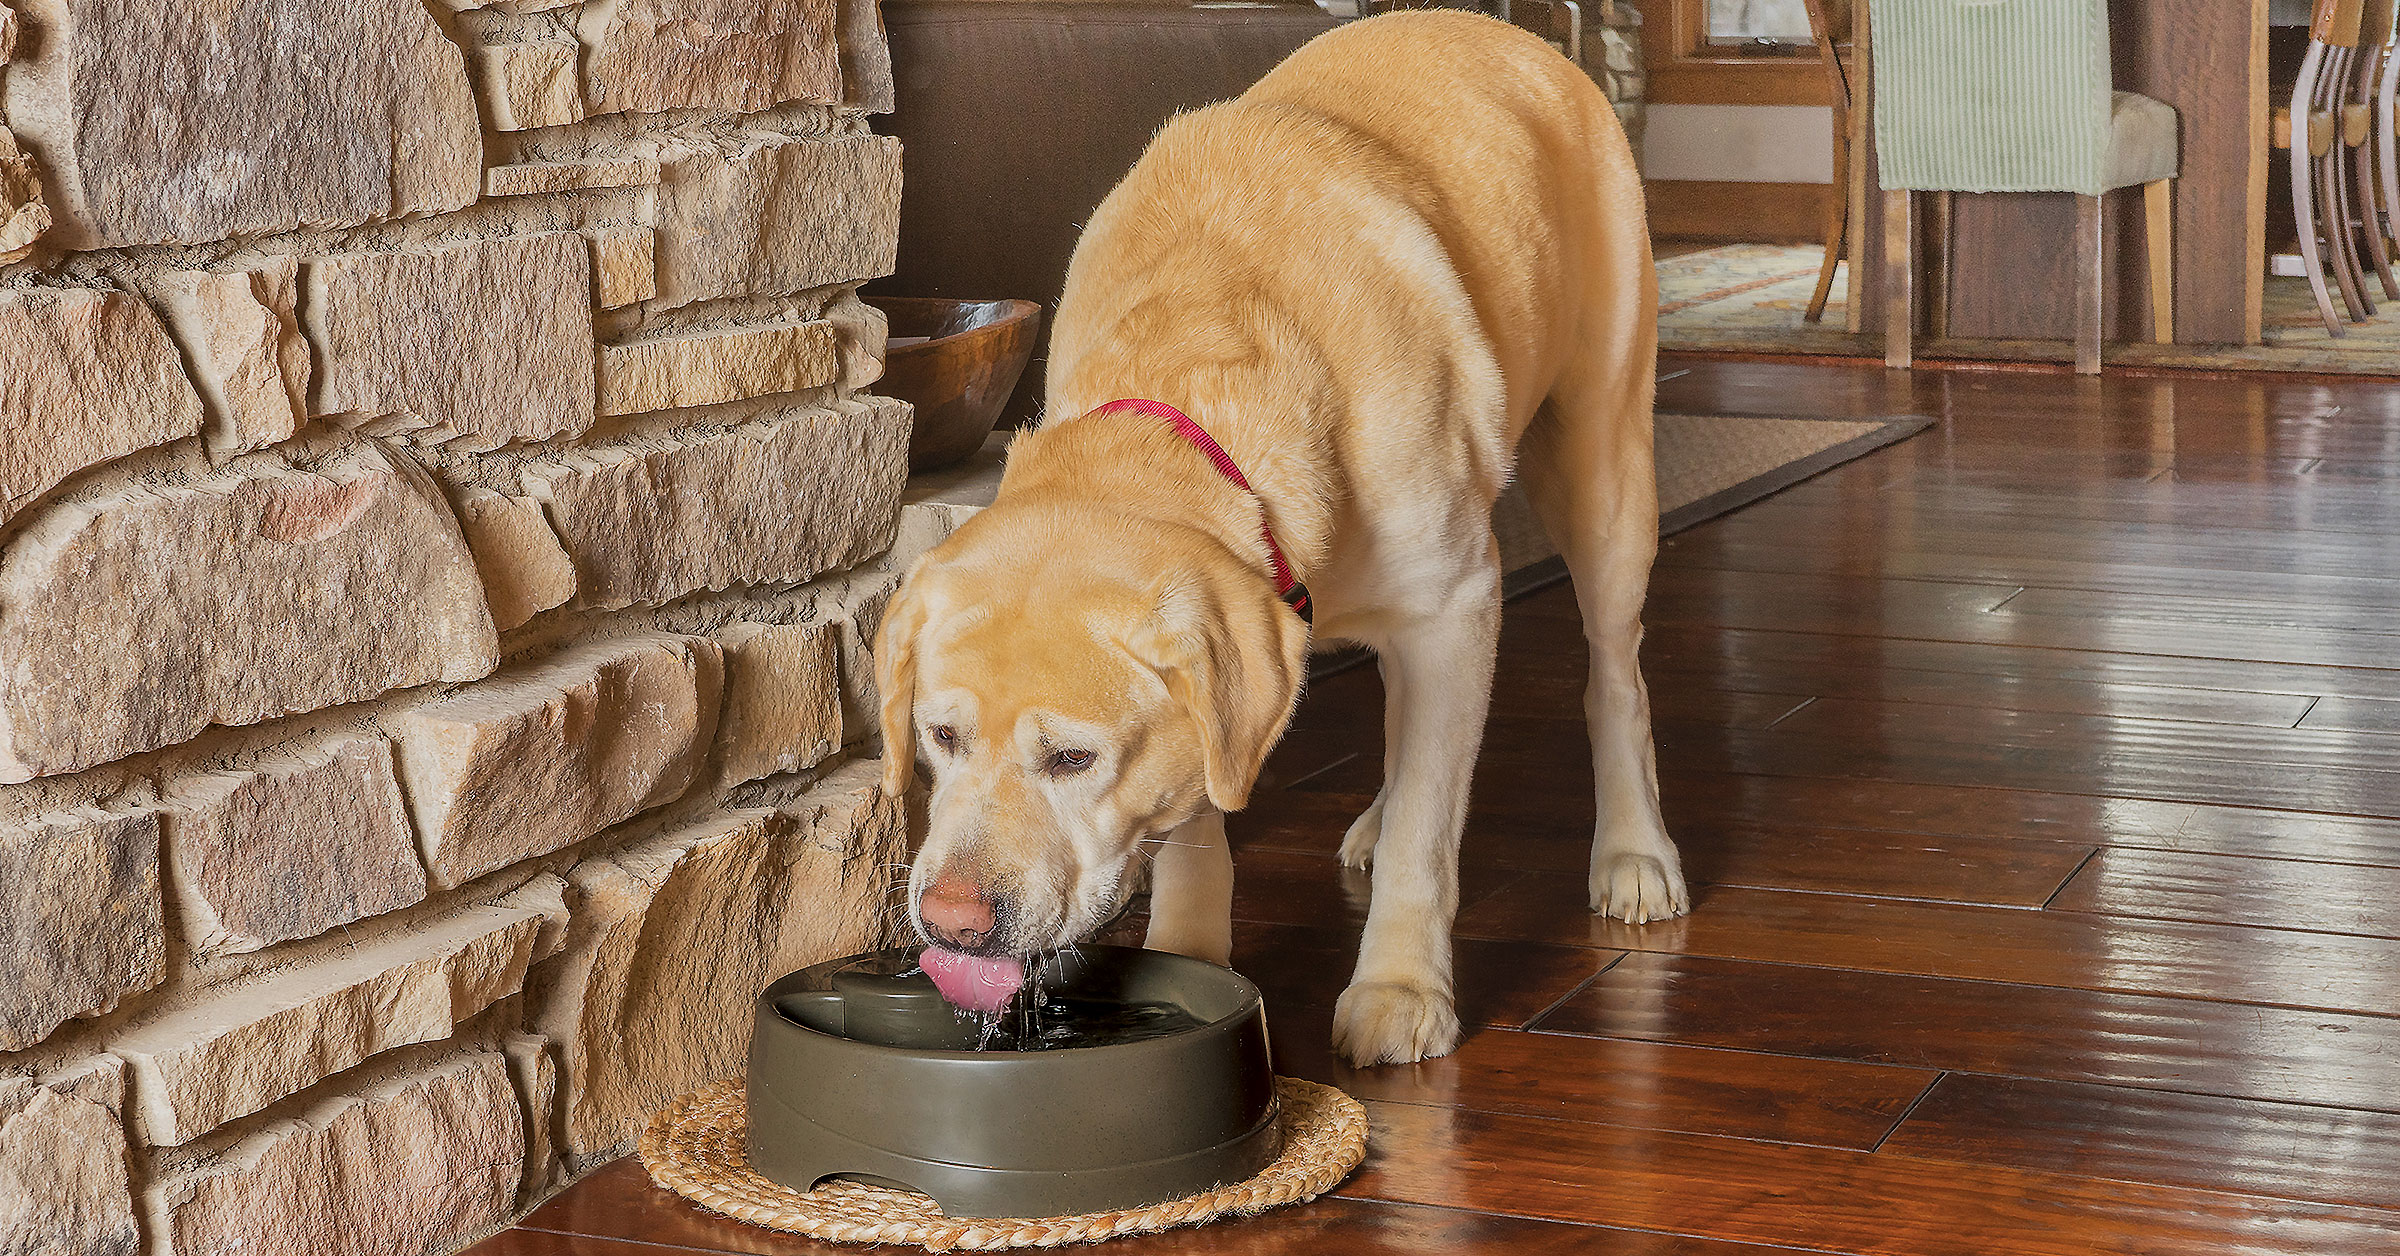 Dogs love drinking water from the ...</div>
					</div>
					
										
									  
					<div class=